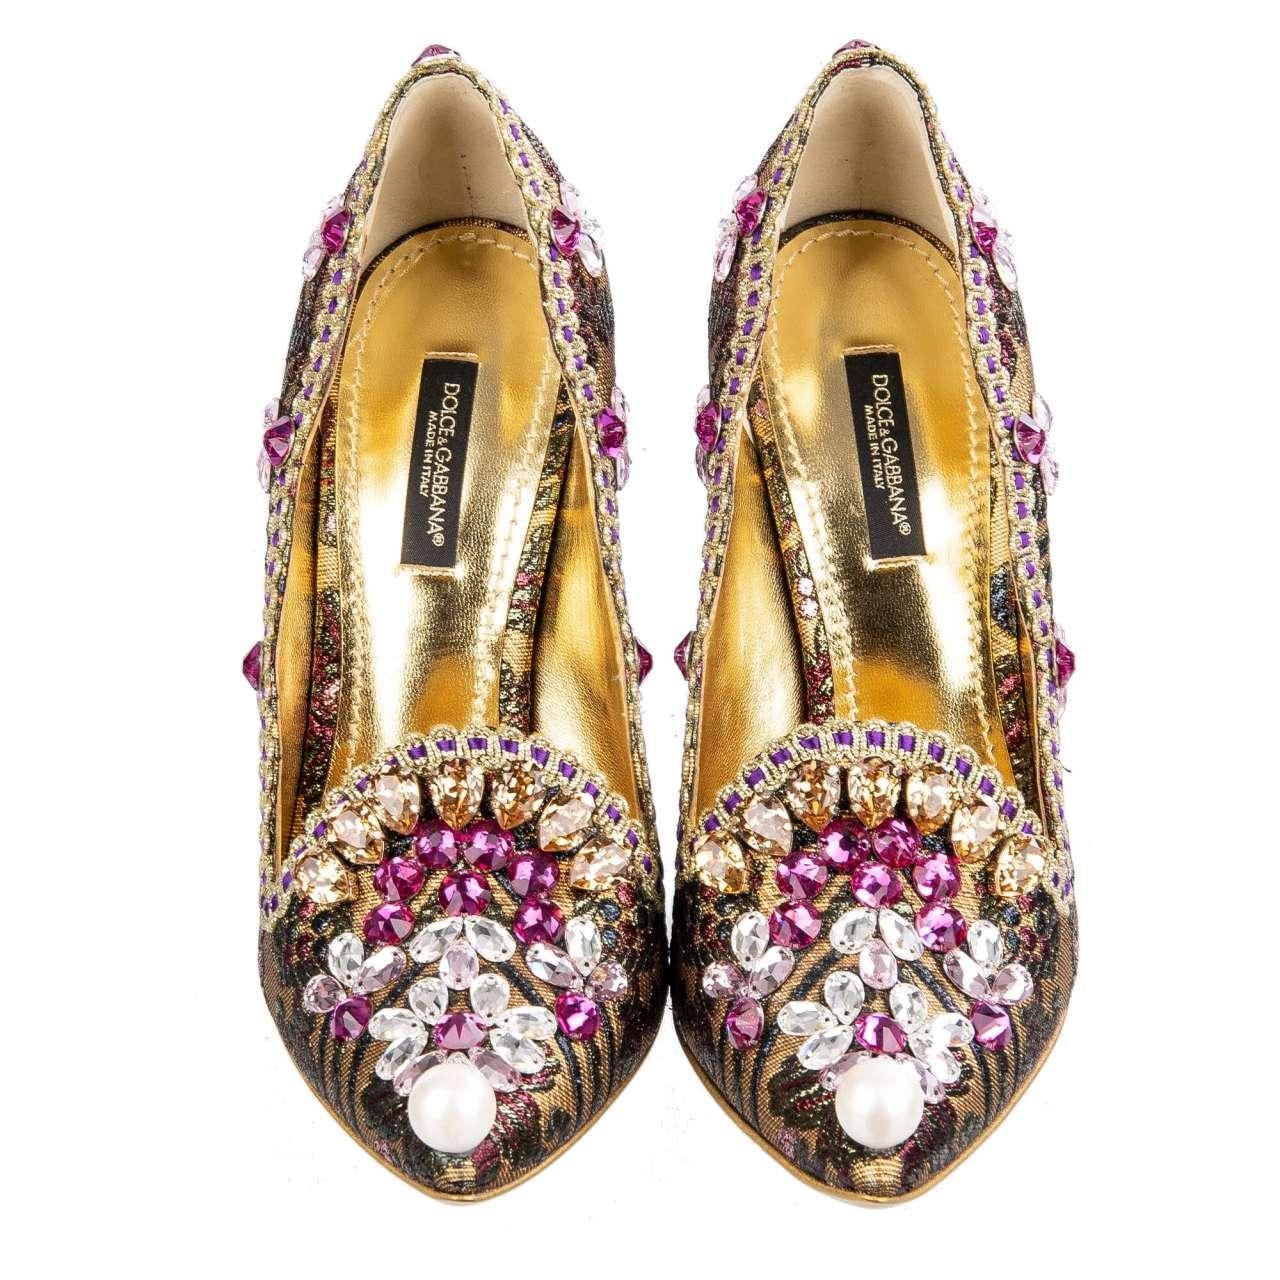 Dolce & Gabbana Lurex Jacquard Crystals Embroidered Pumps ALADINO Gold EUR 37.5 For Sale 1